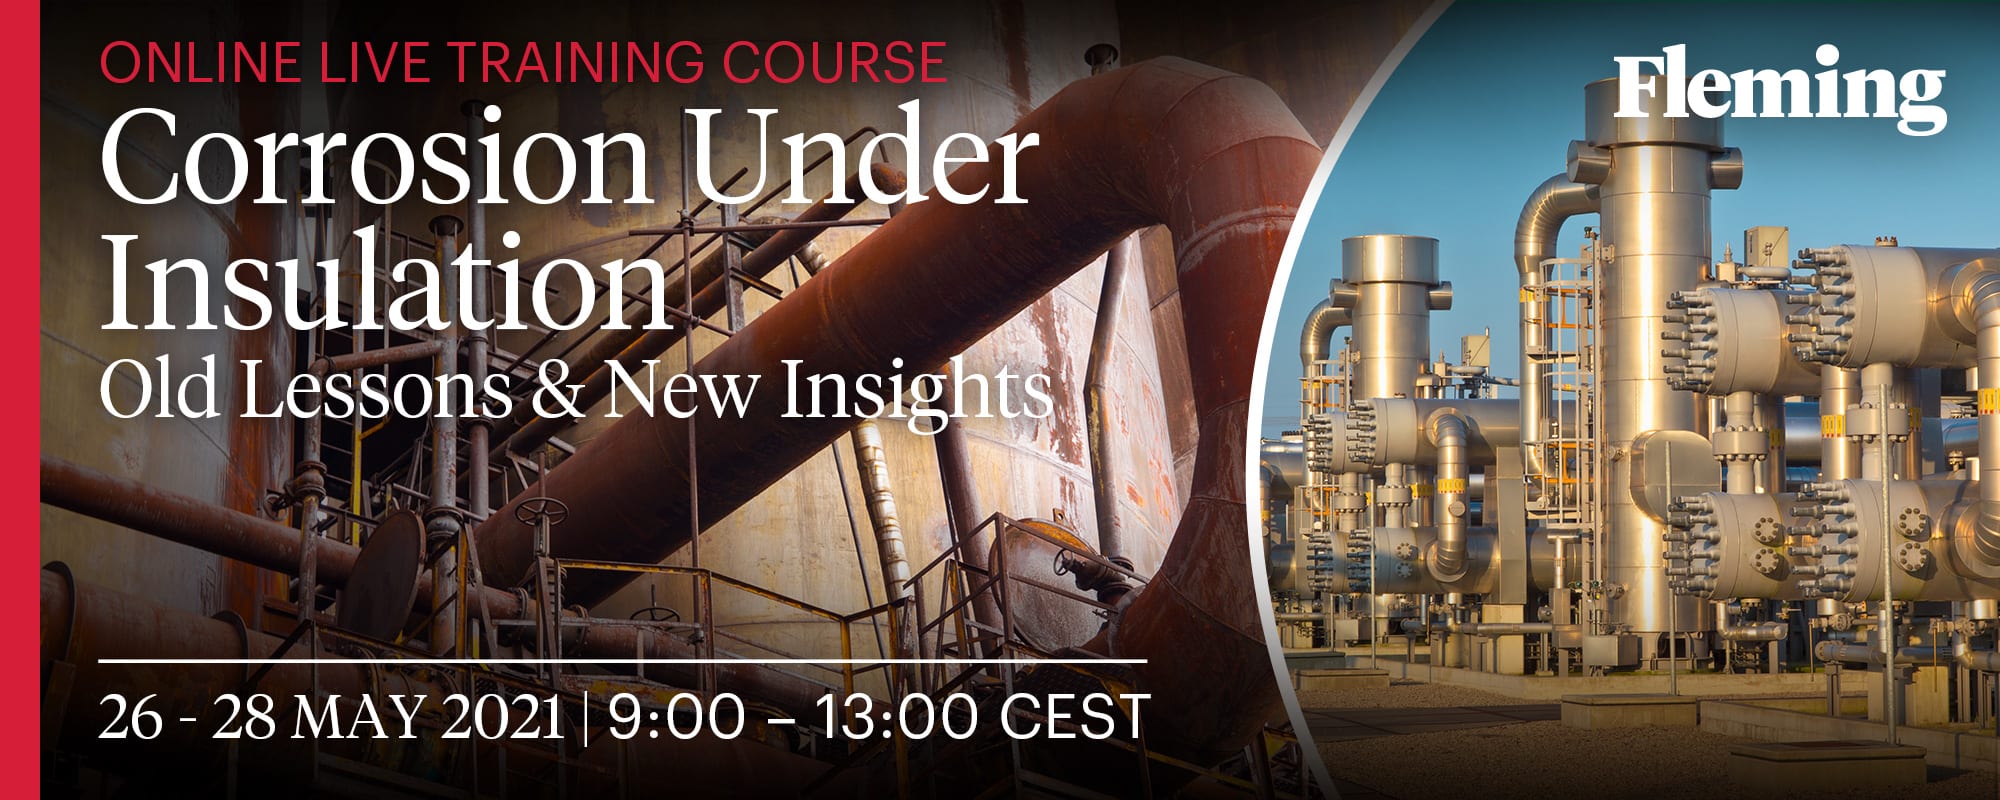 Save the dates for the upcoming Corrosion Under Insulation Masterclass